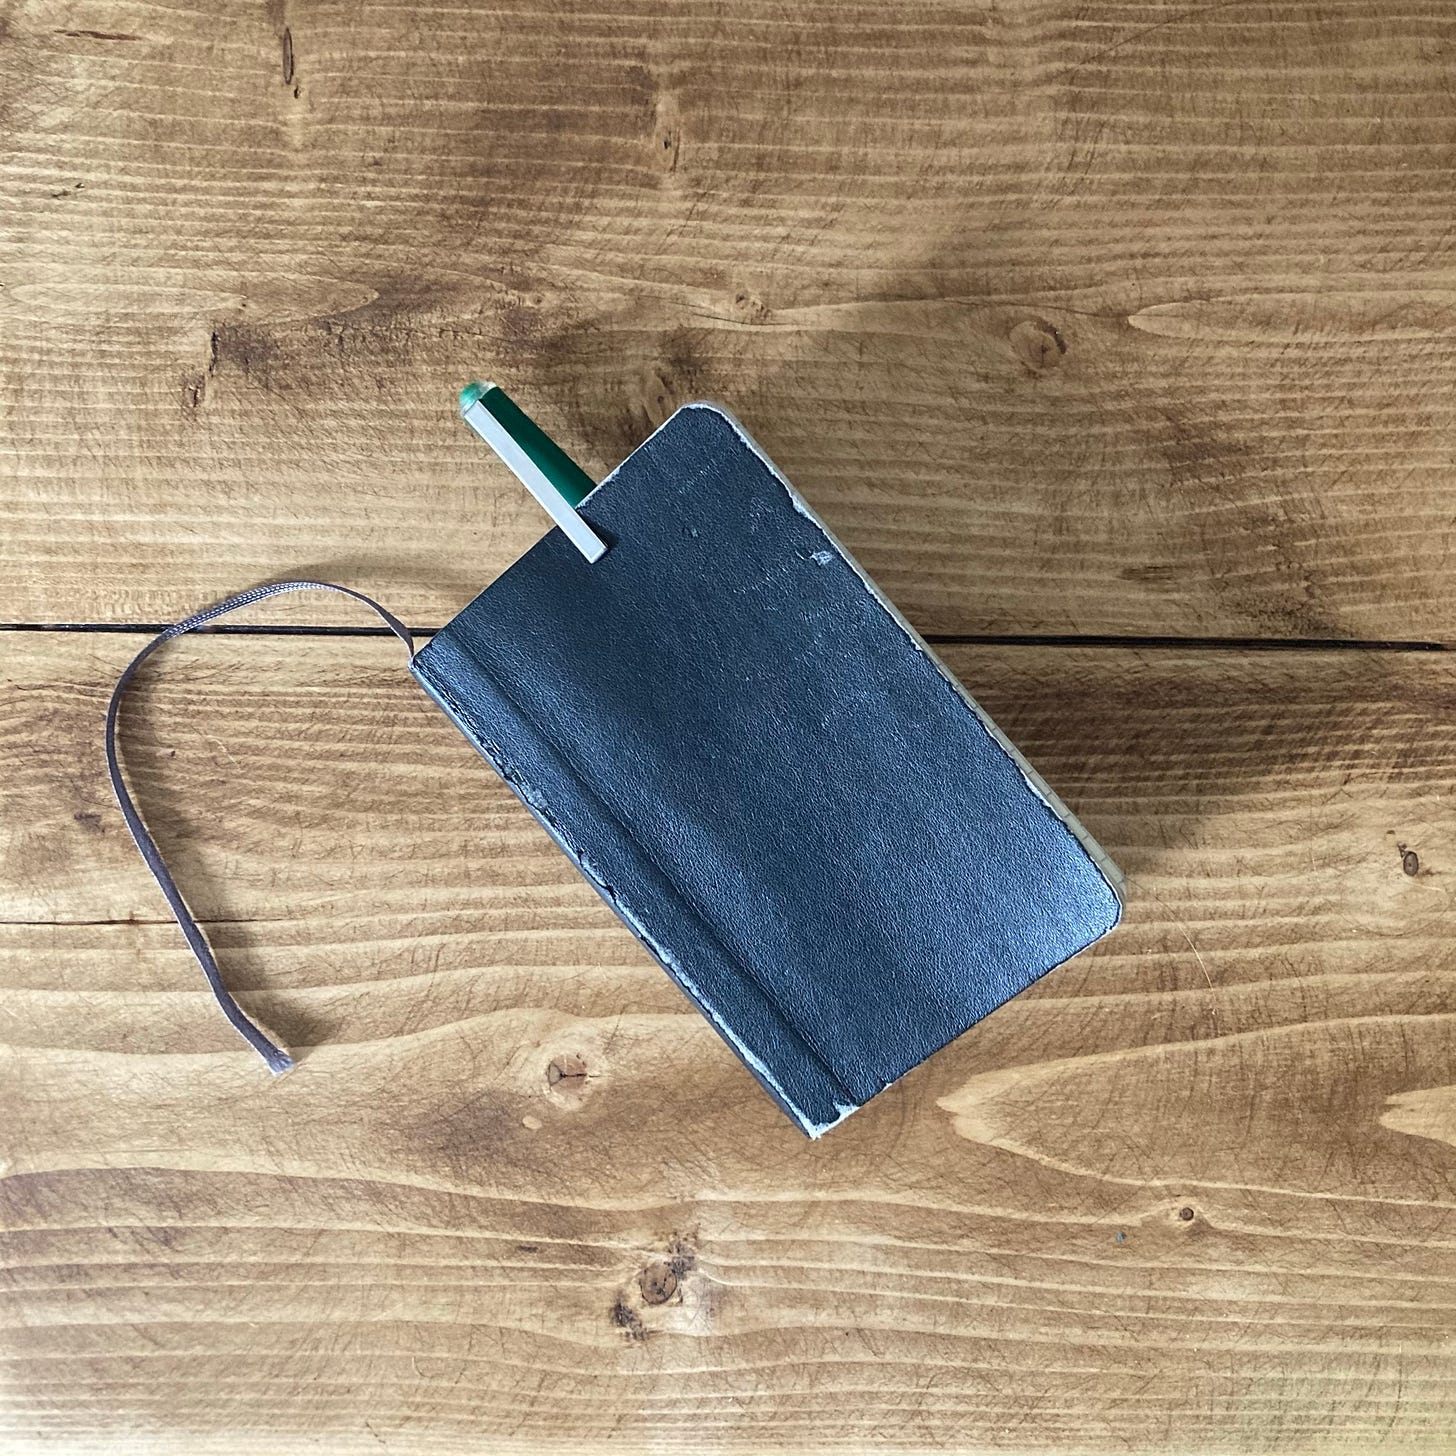 A battered, pocked-sized notebook